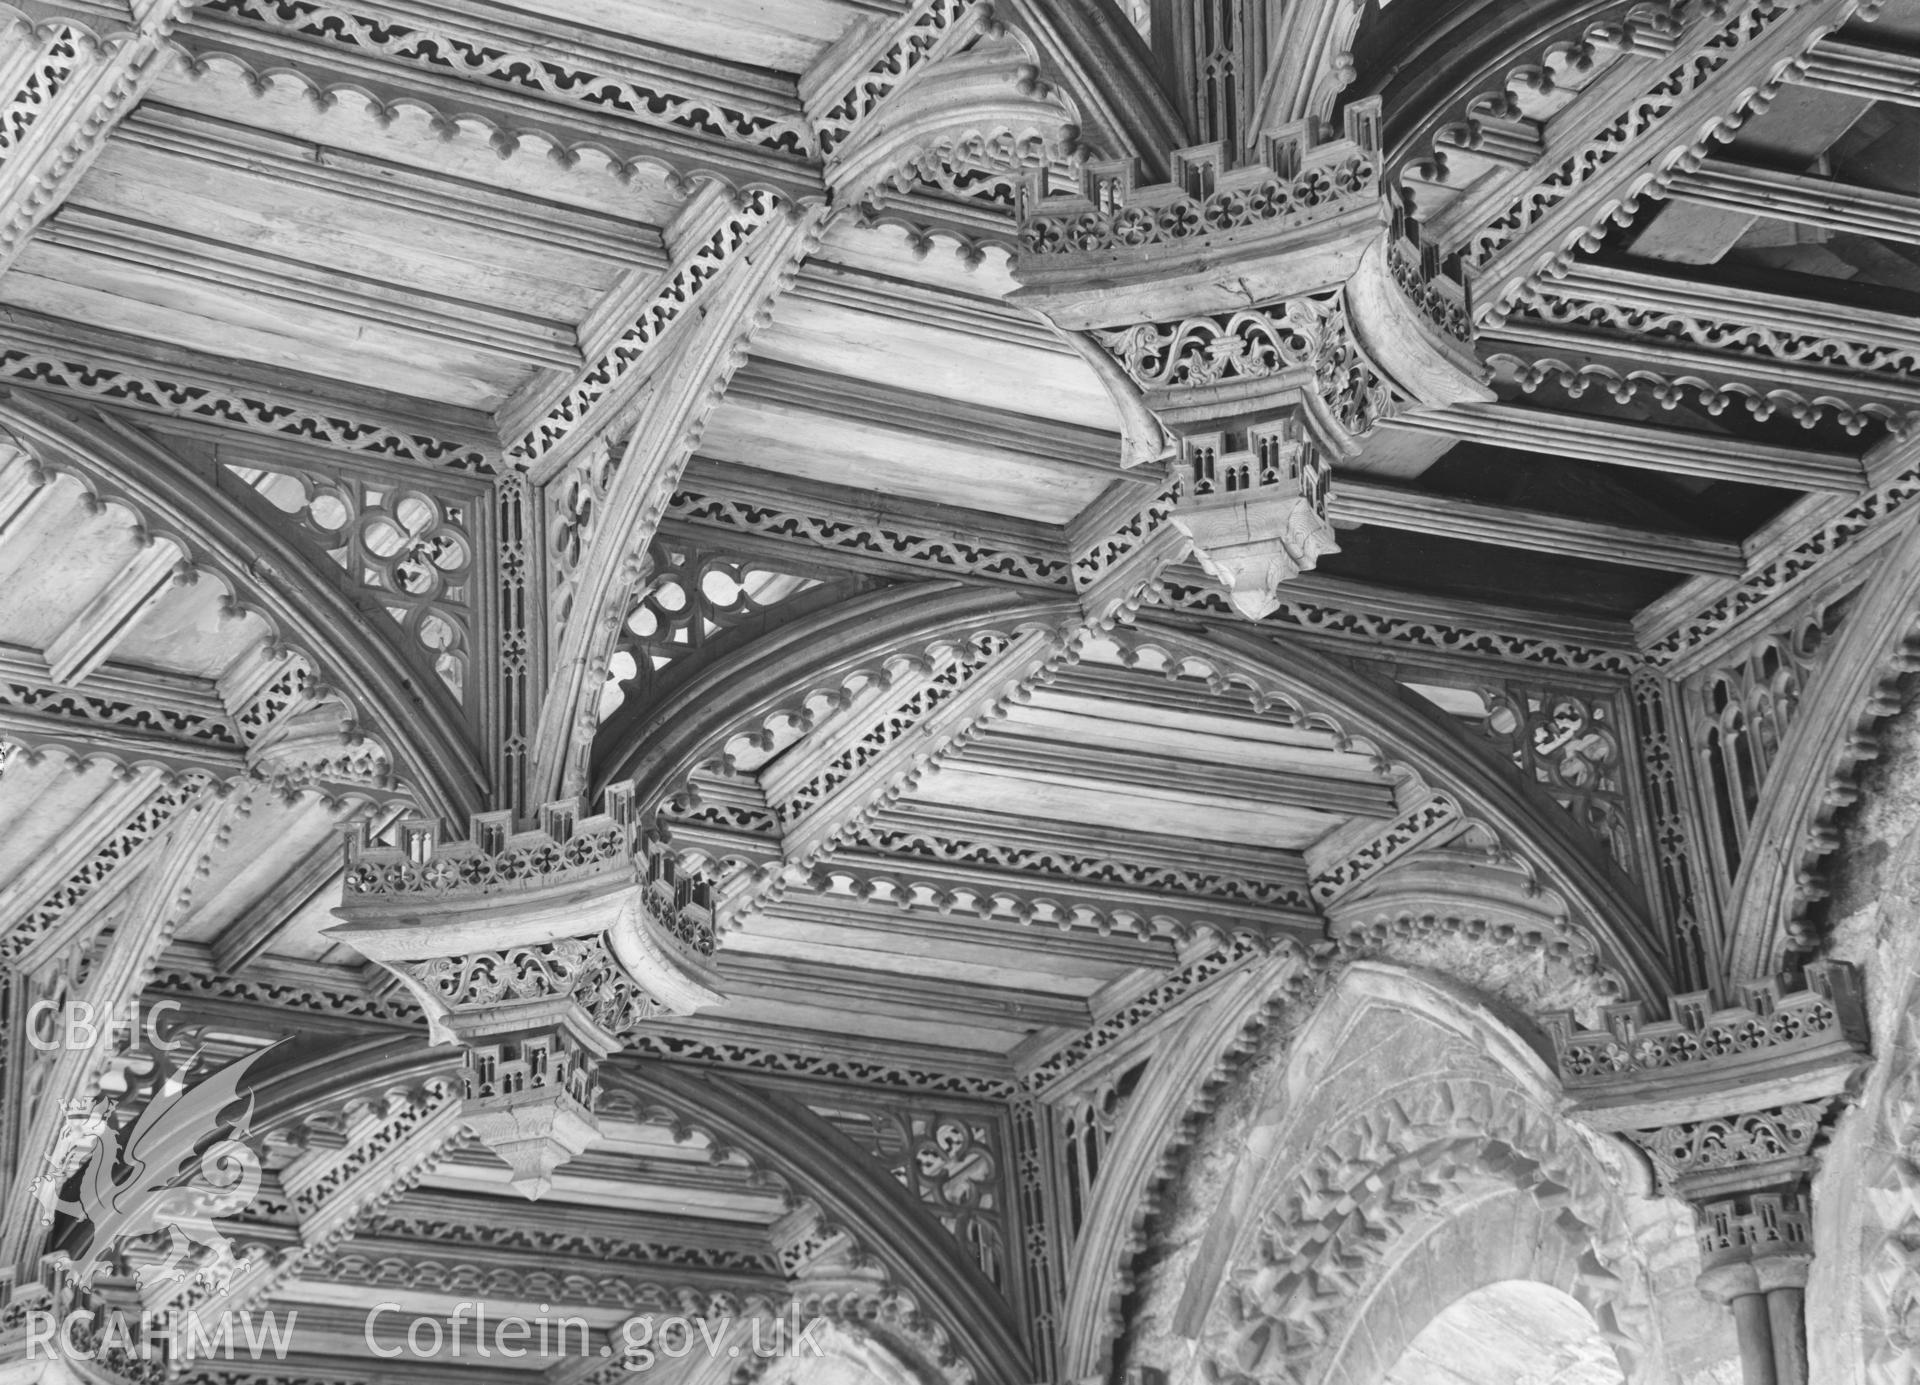 Digital copy of a black and white nitrate negative showing view of ceiling pendants at St David's Cathedral, taken by E.W. Lovegrove, July 1936.